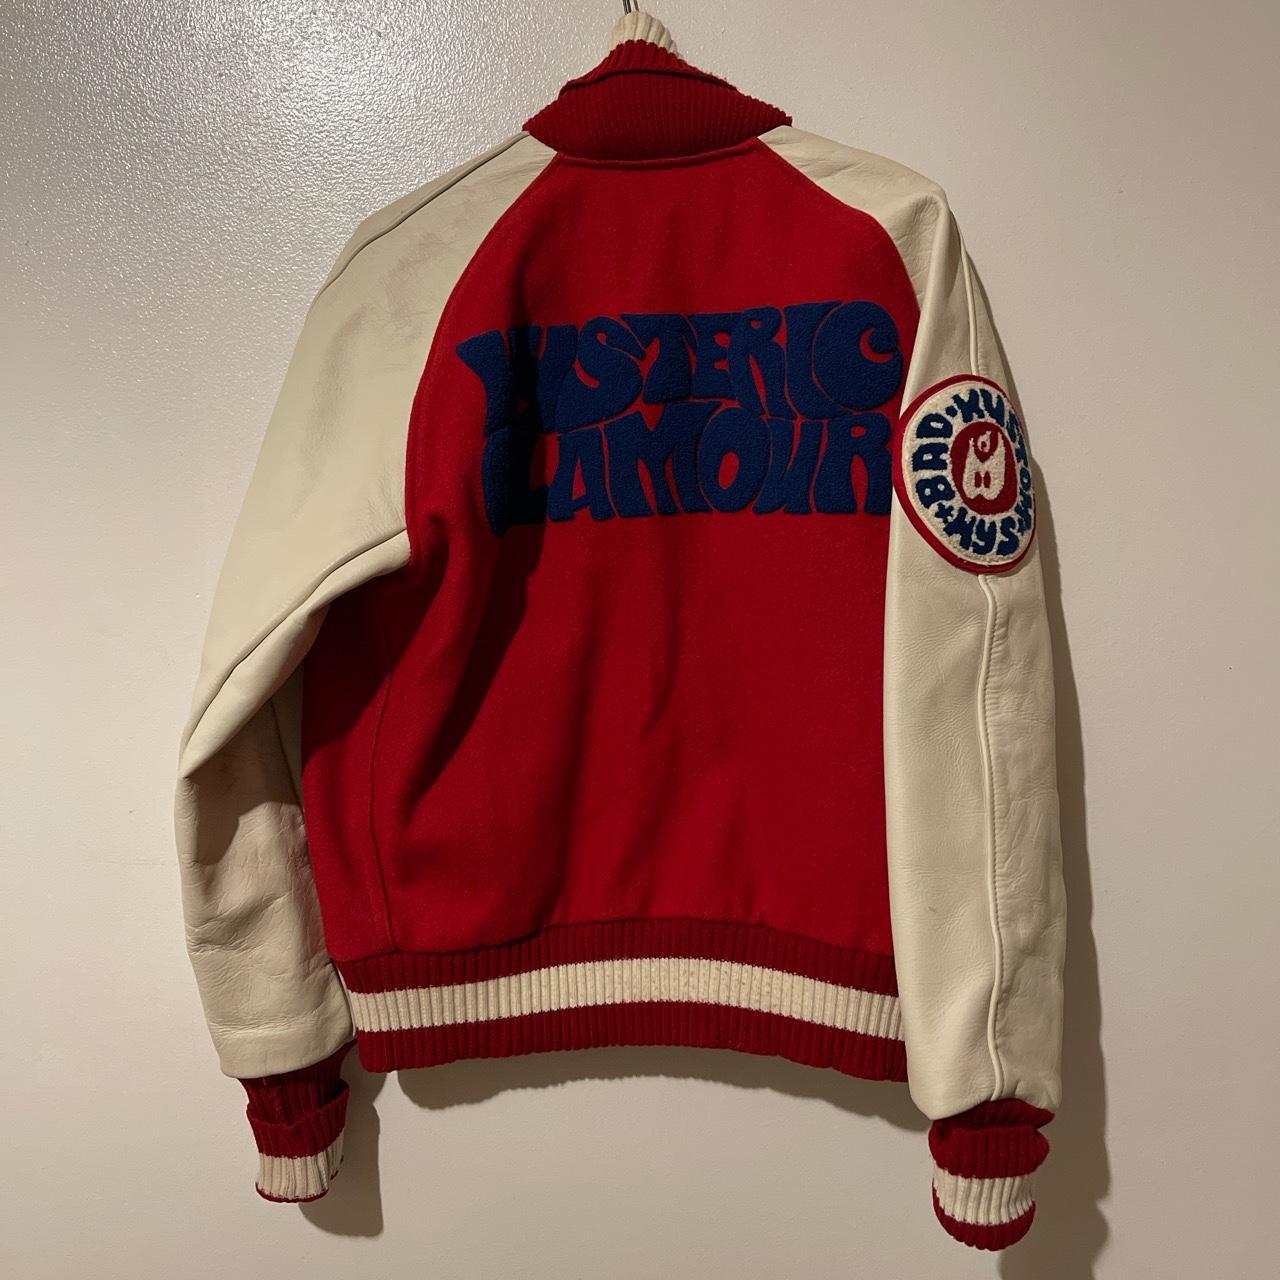 Hysteric Glamour Varsity Jacket PAY WITH PAYPAL 🖖🏿 - Depop